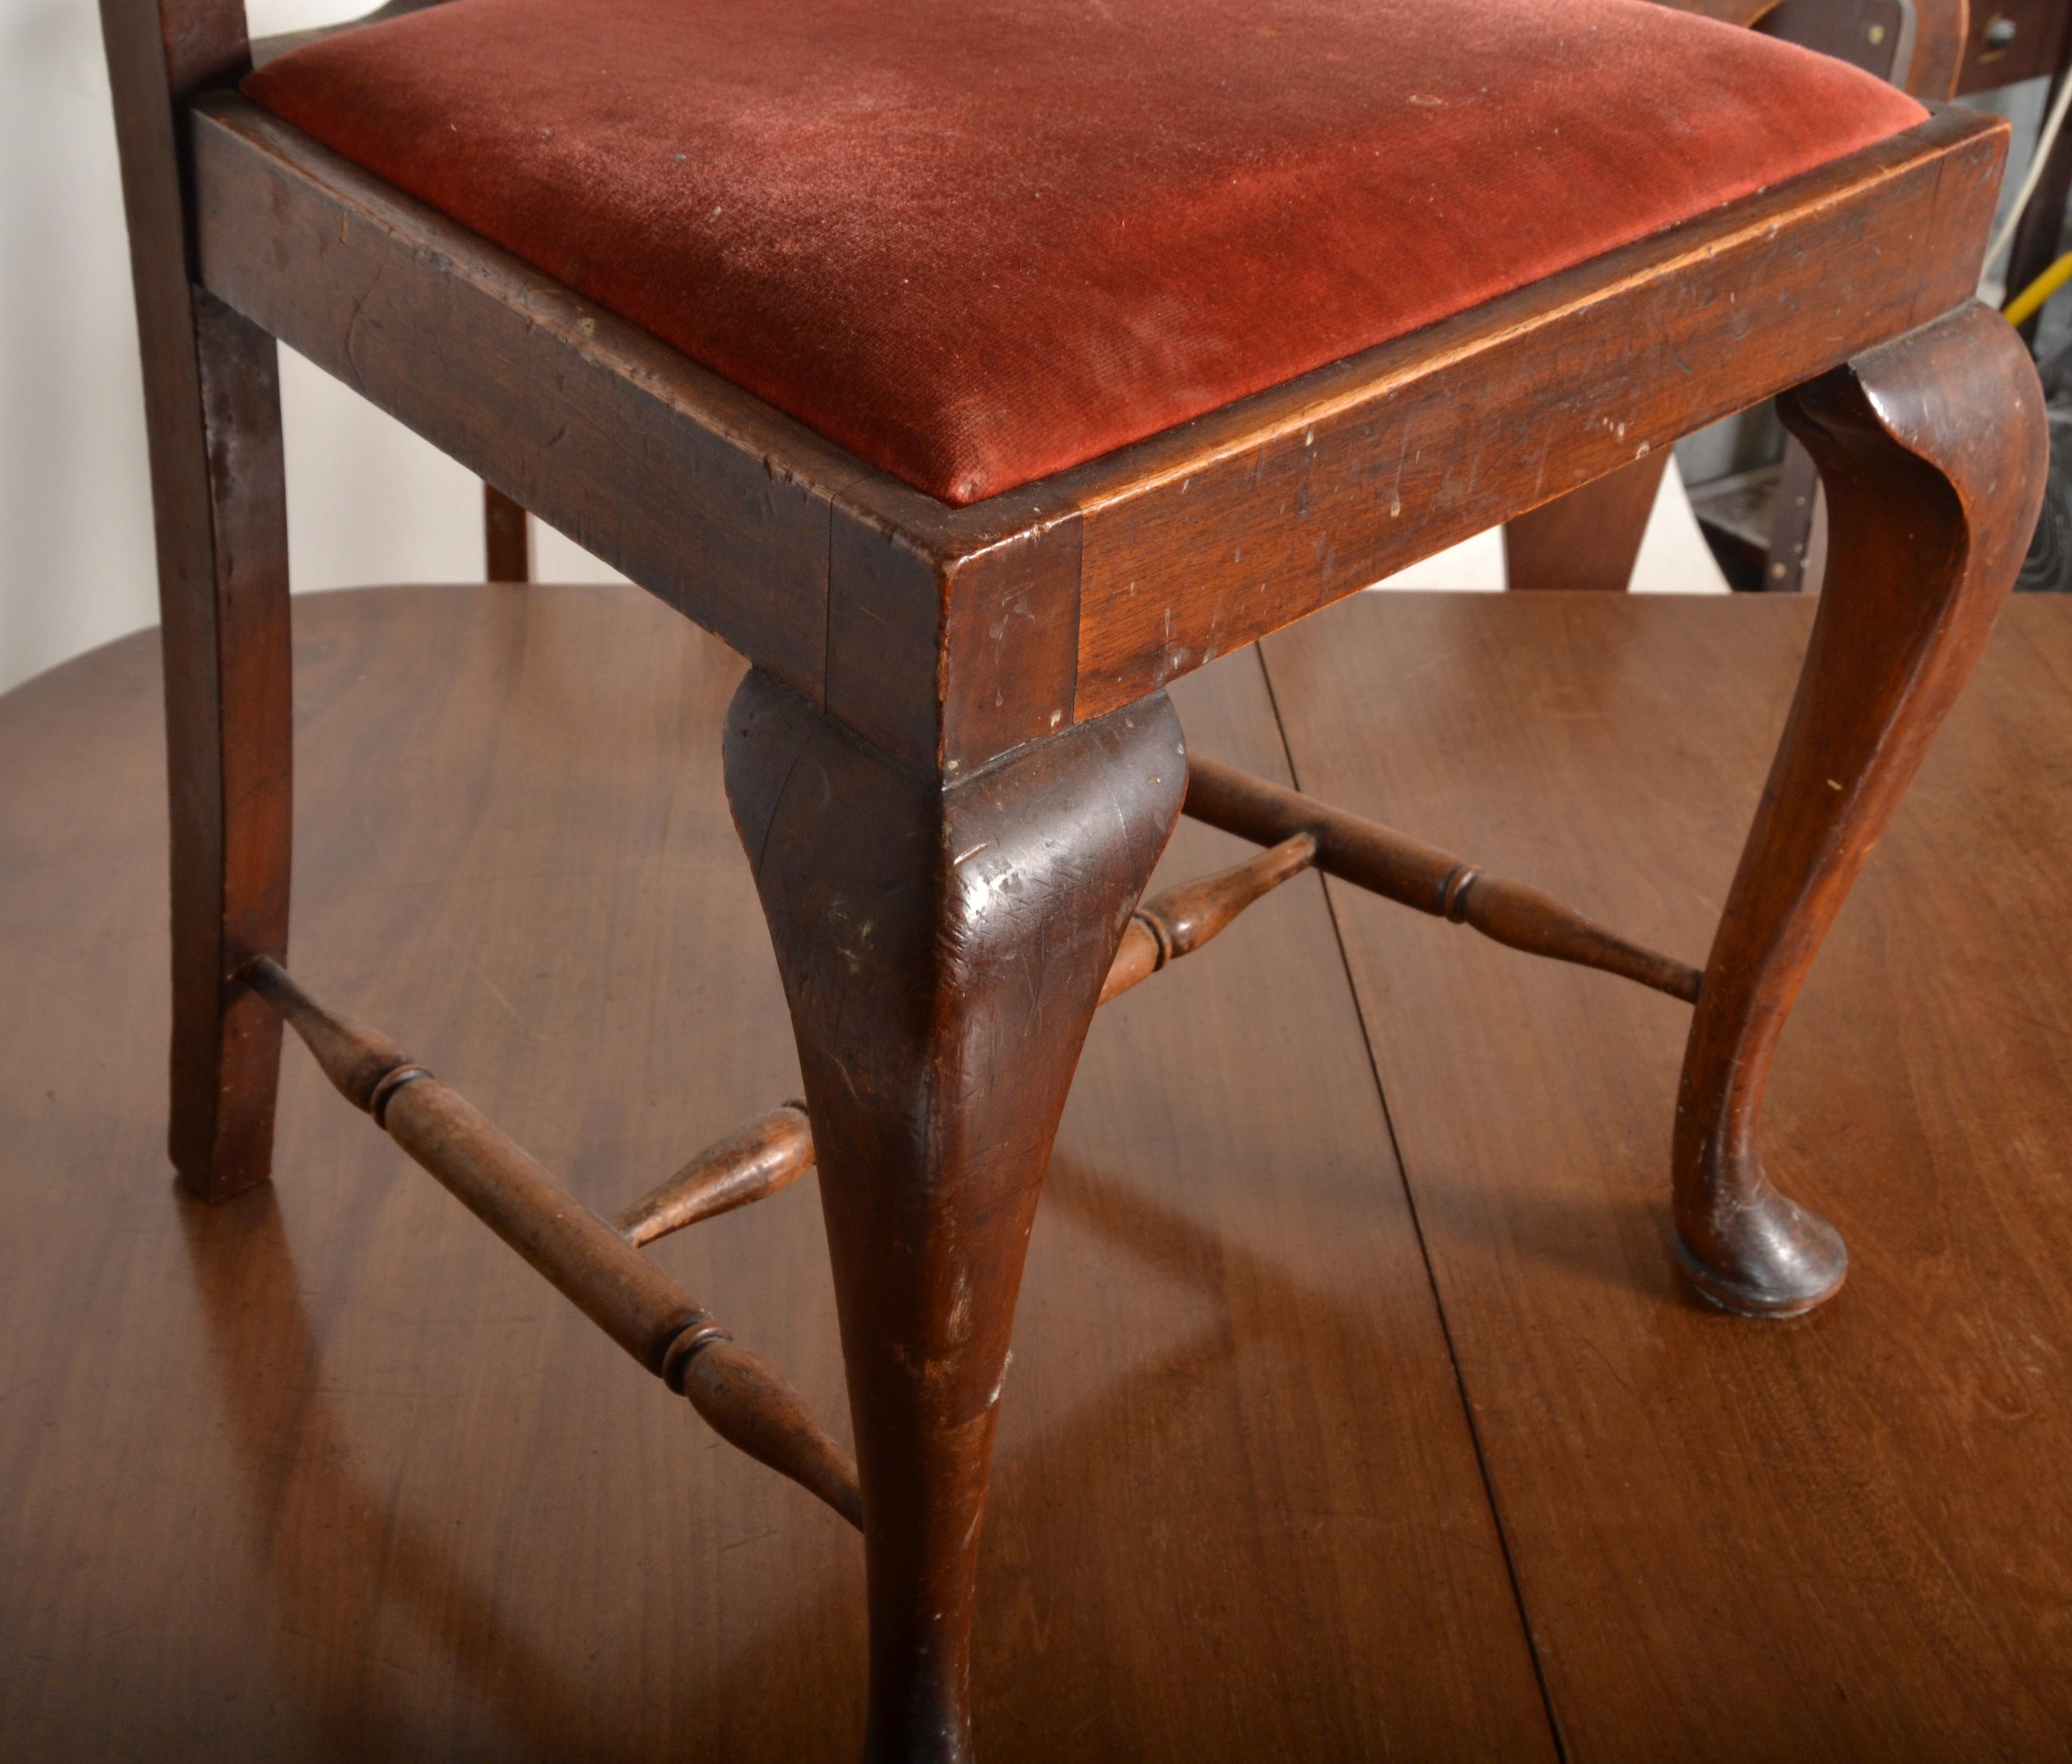 A 1920s mahogany extending dining table with cabriole legs along with 6